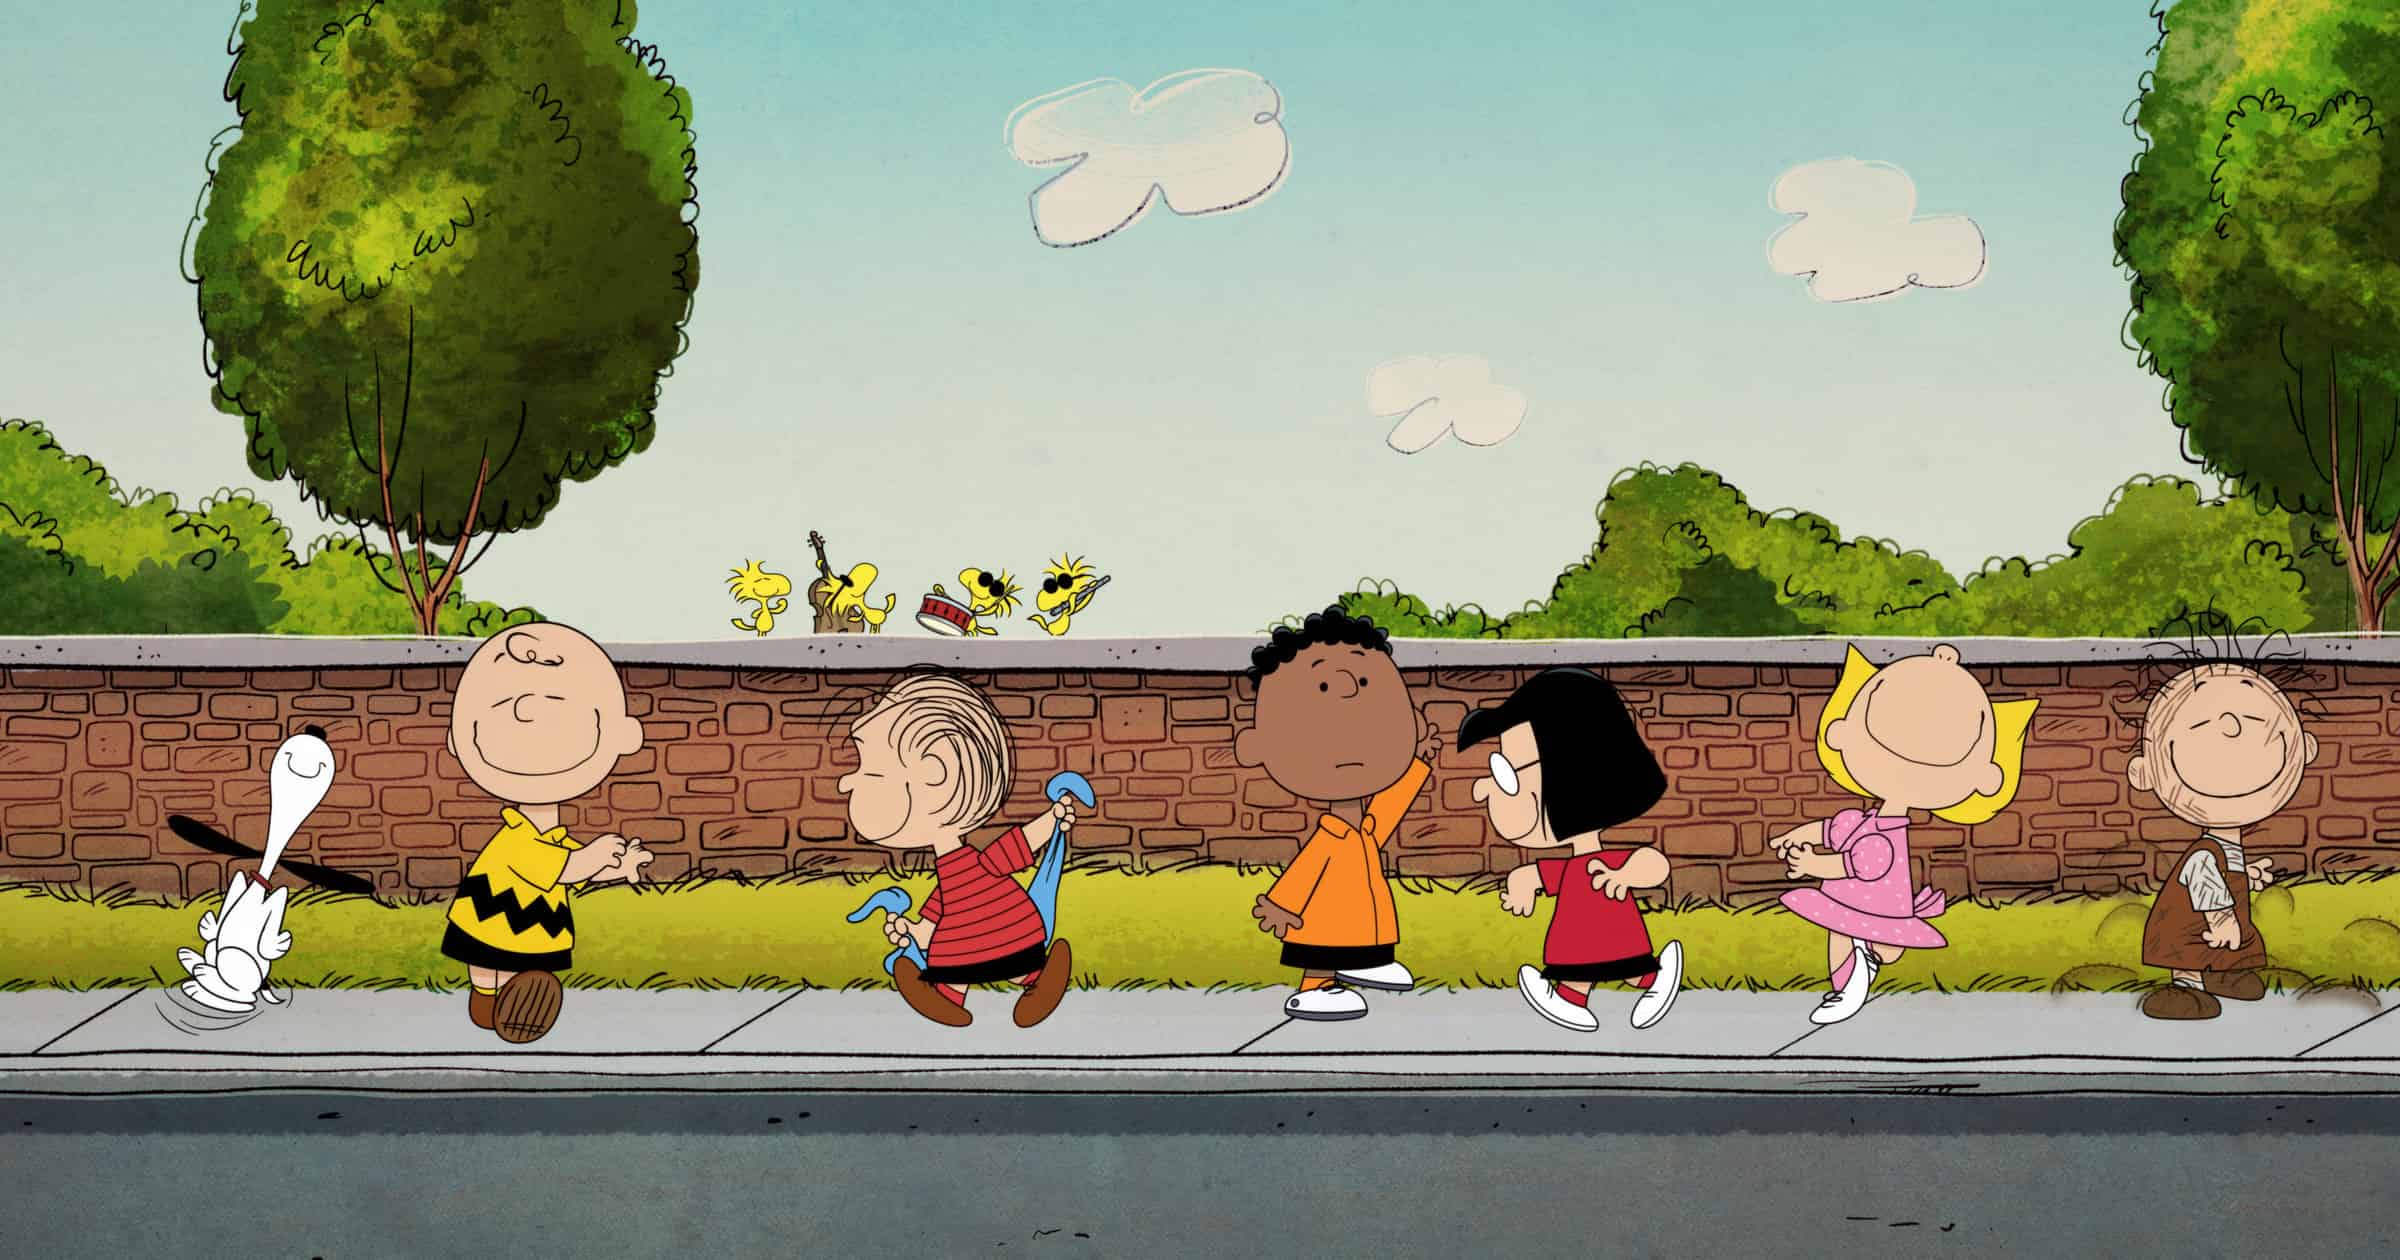 It Looks Like The Peanuts Holiday Specials Will be Exclusive to Apple TV+